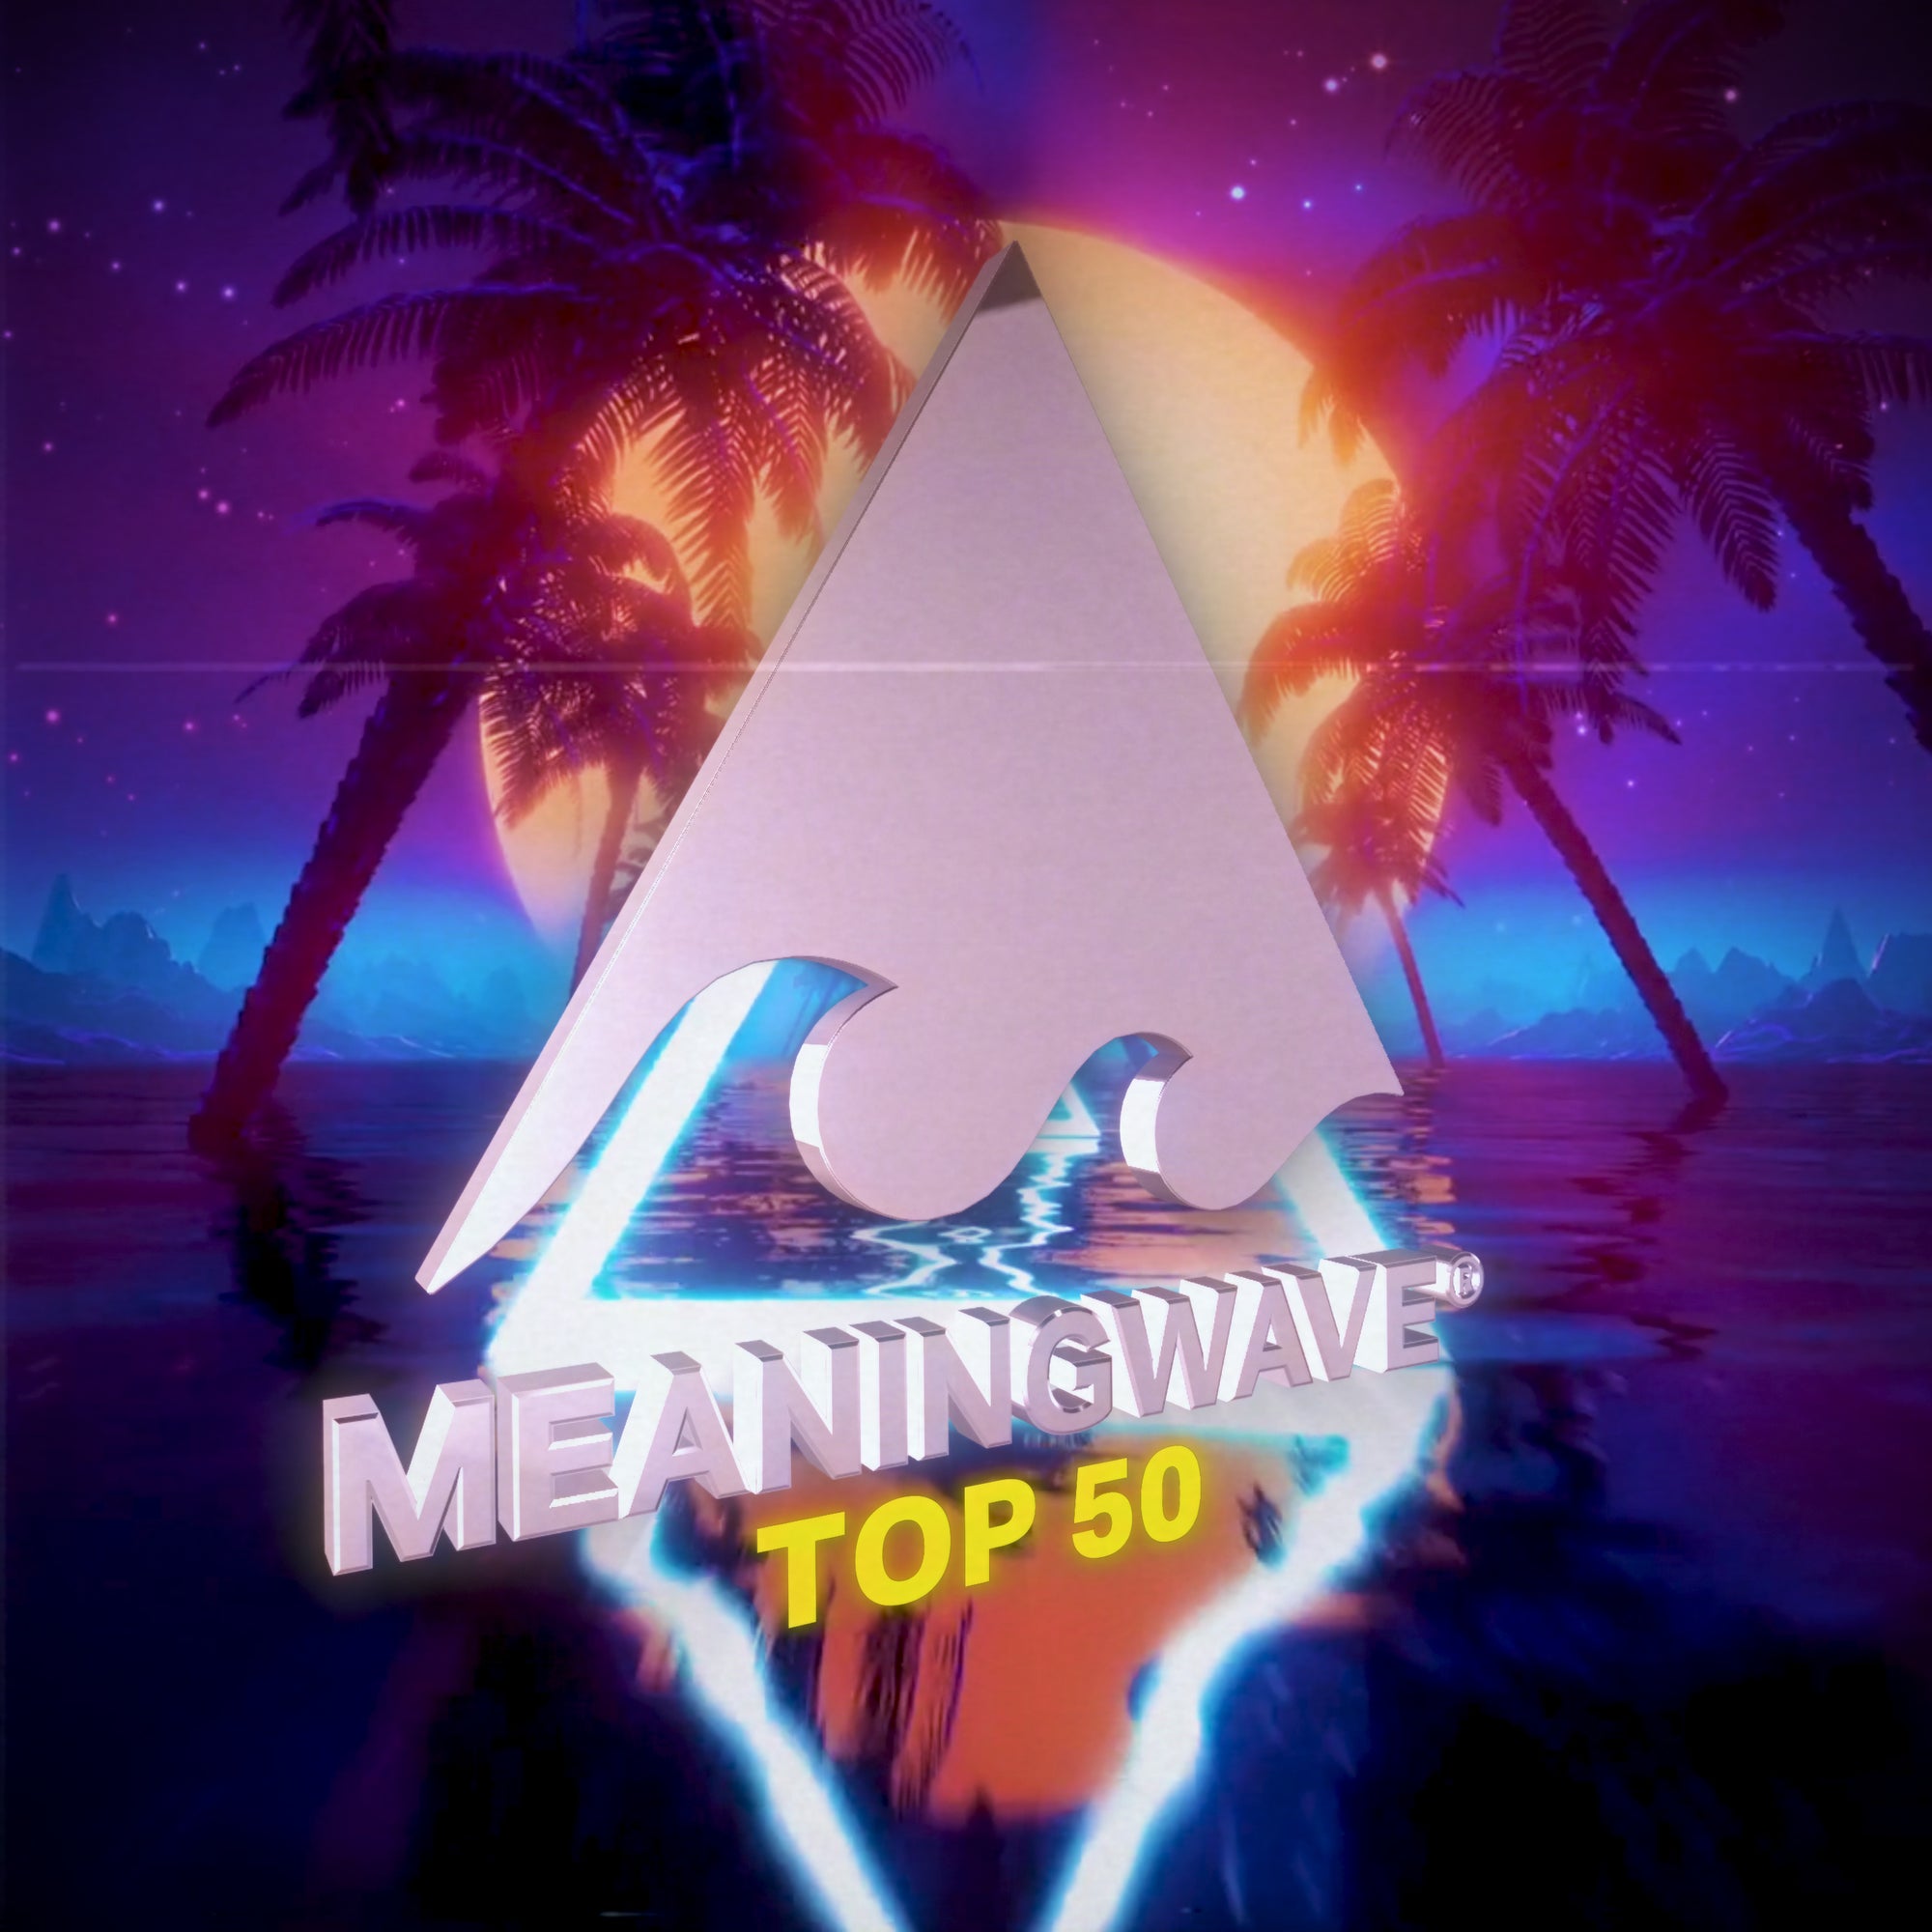 PLAYLIST: It's the official Meaningwave Top 50